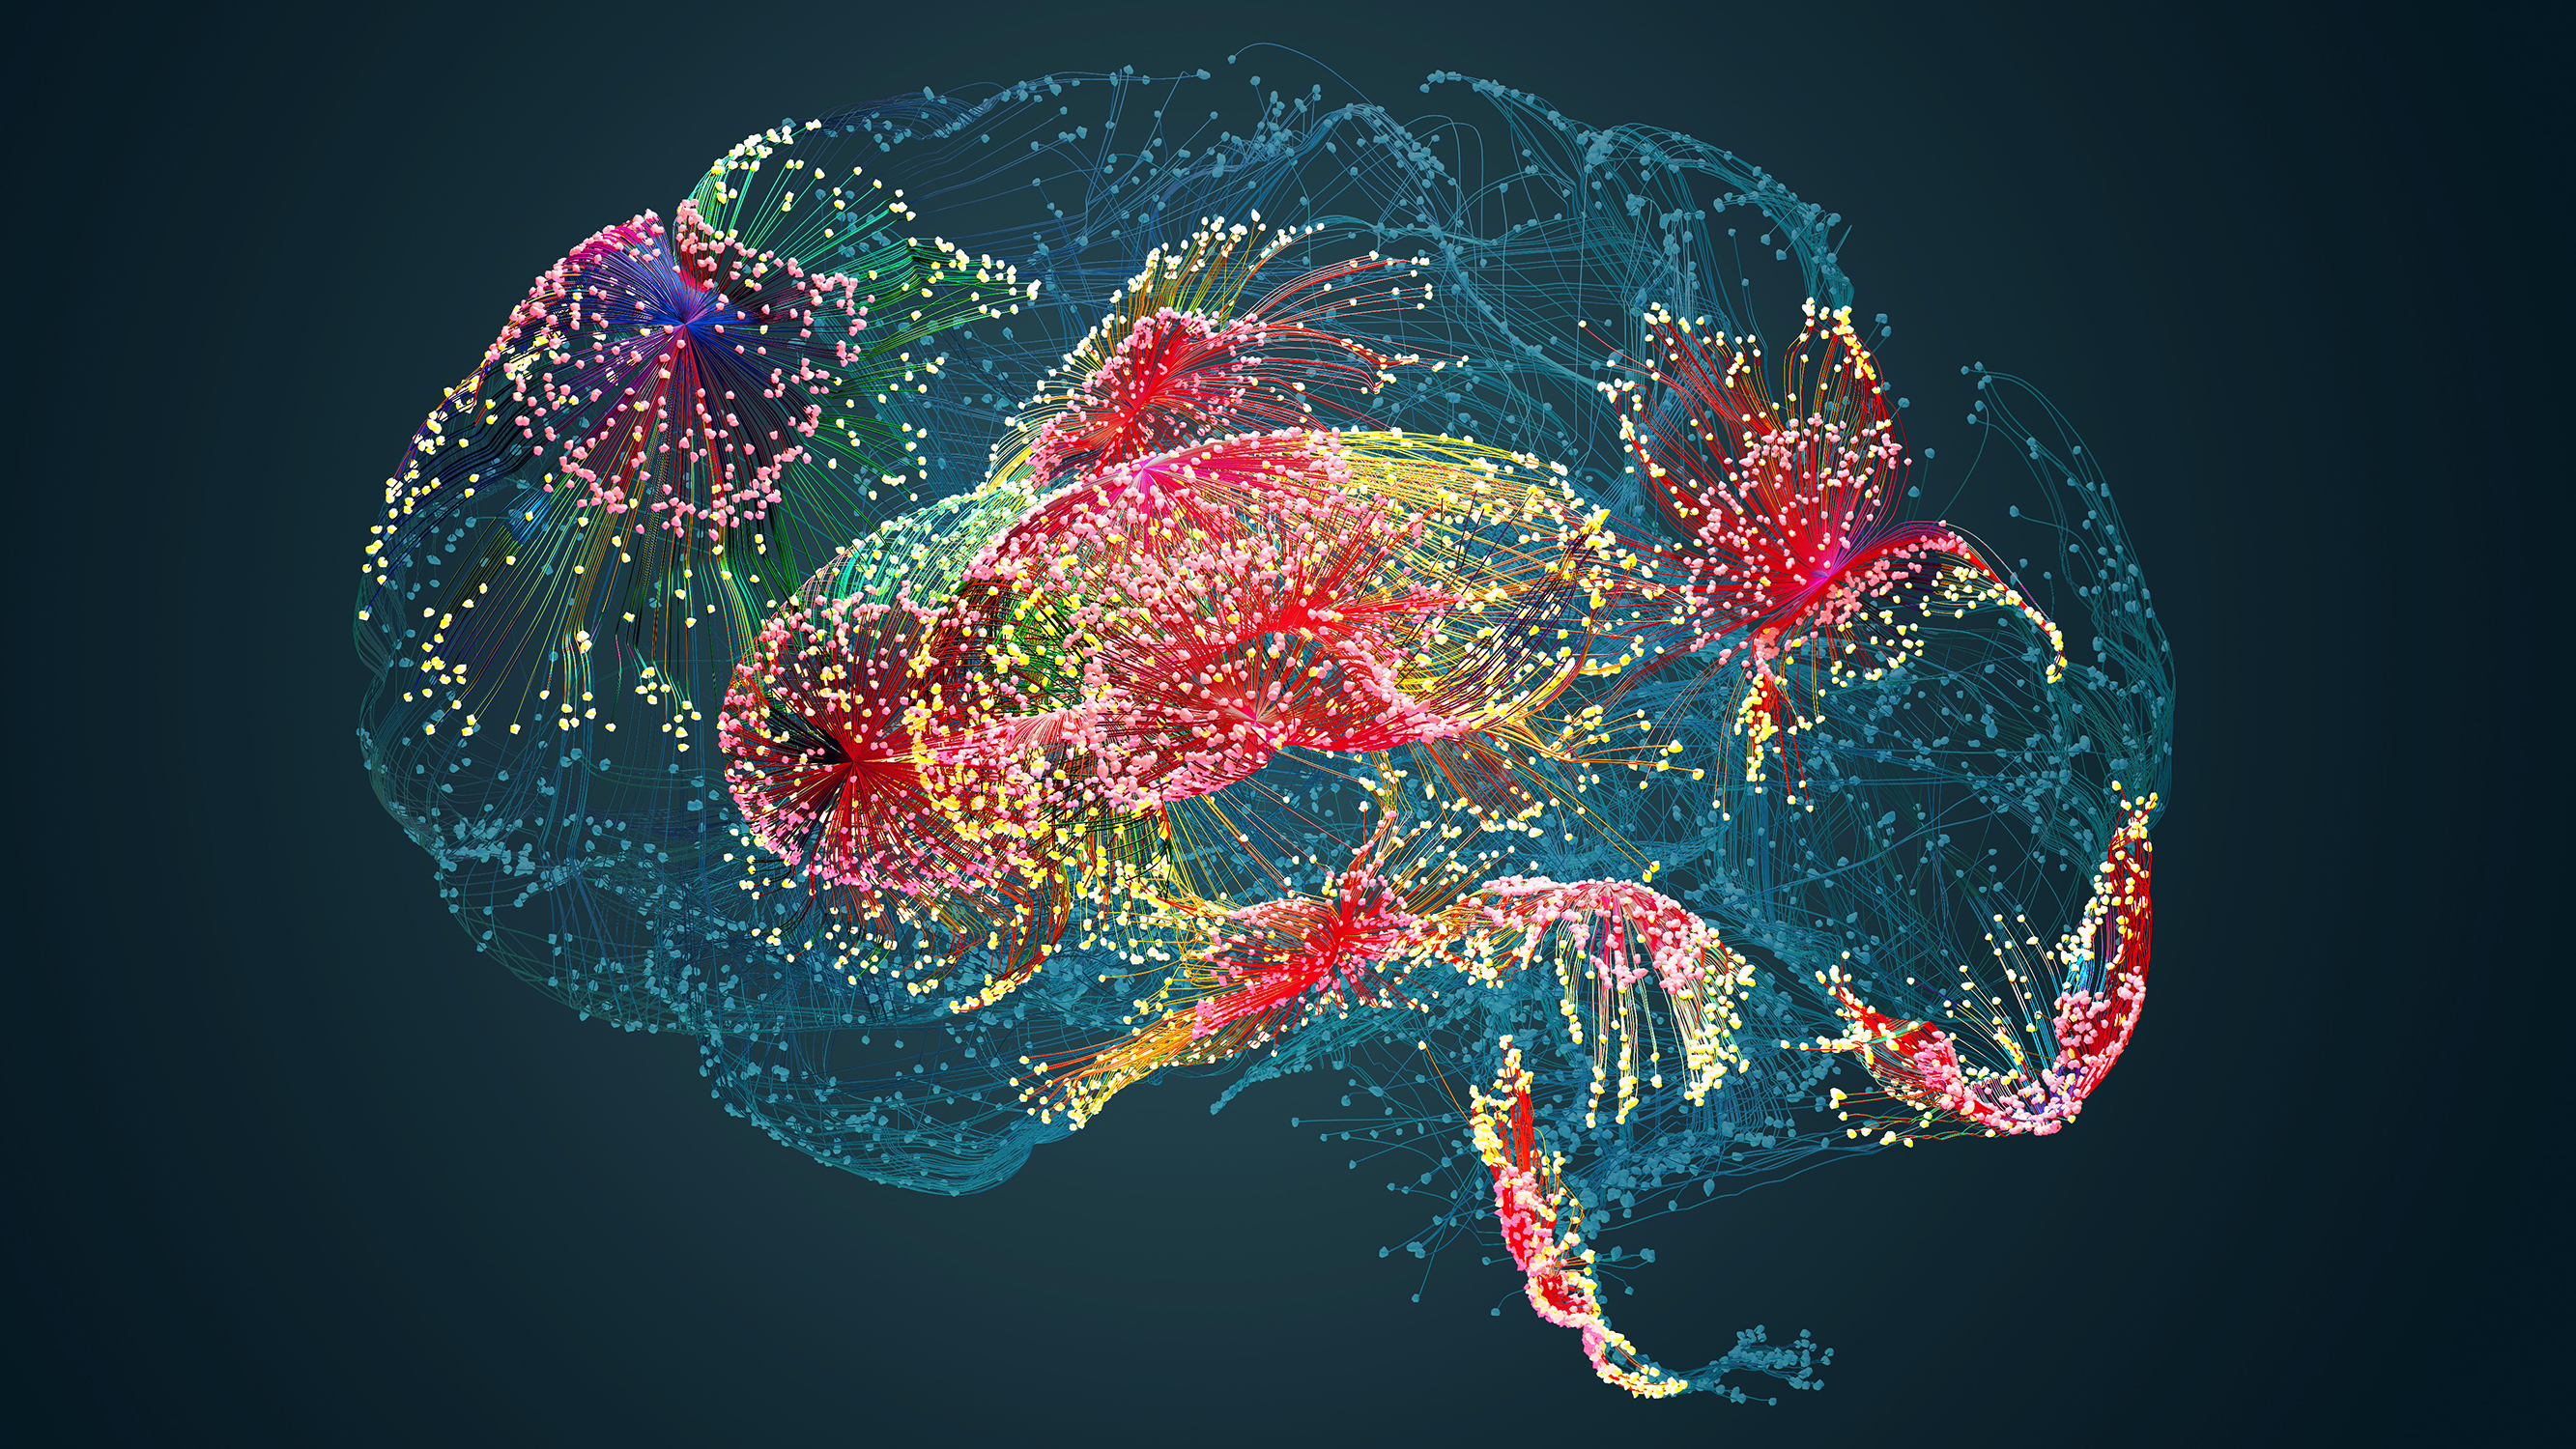 Artistic concept of neural networks and related activity in the human brain.